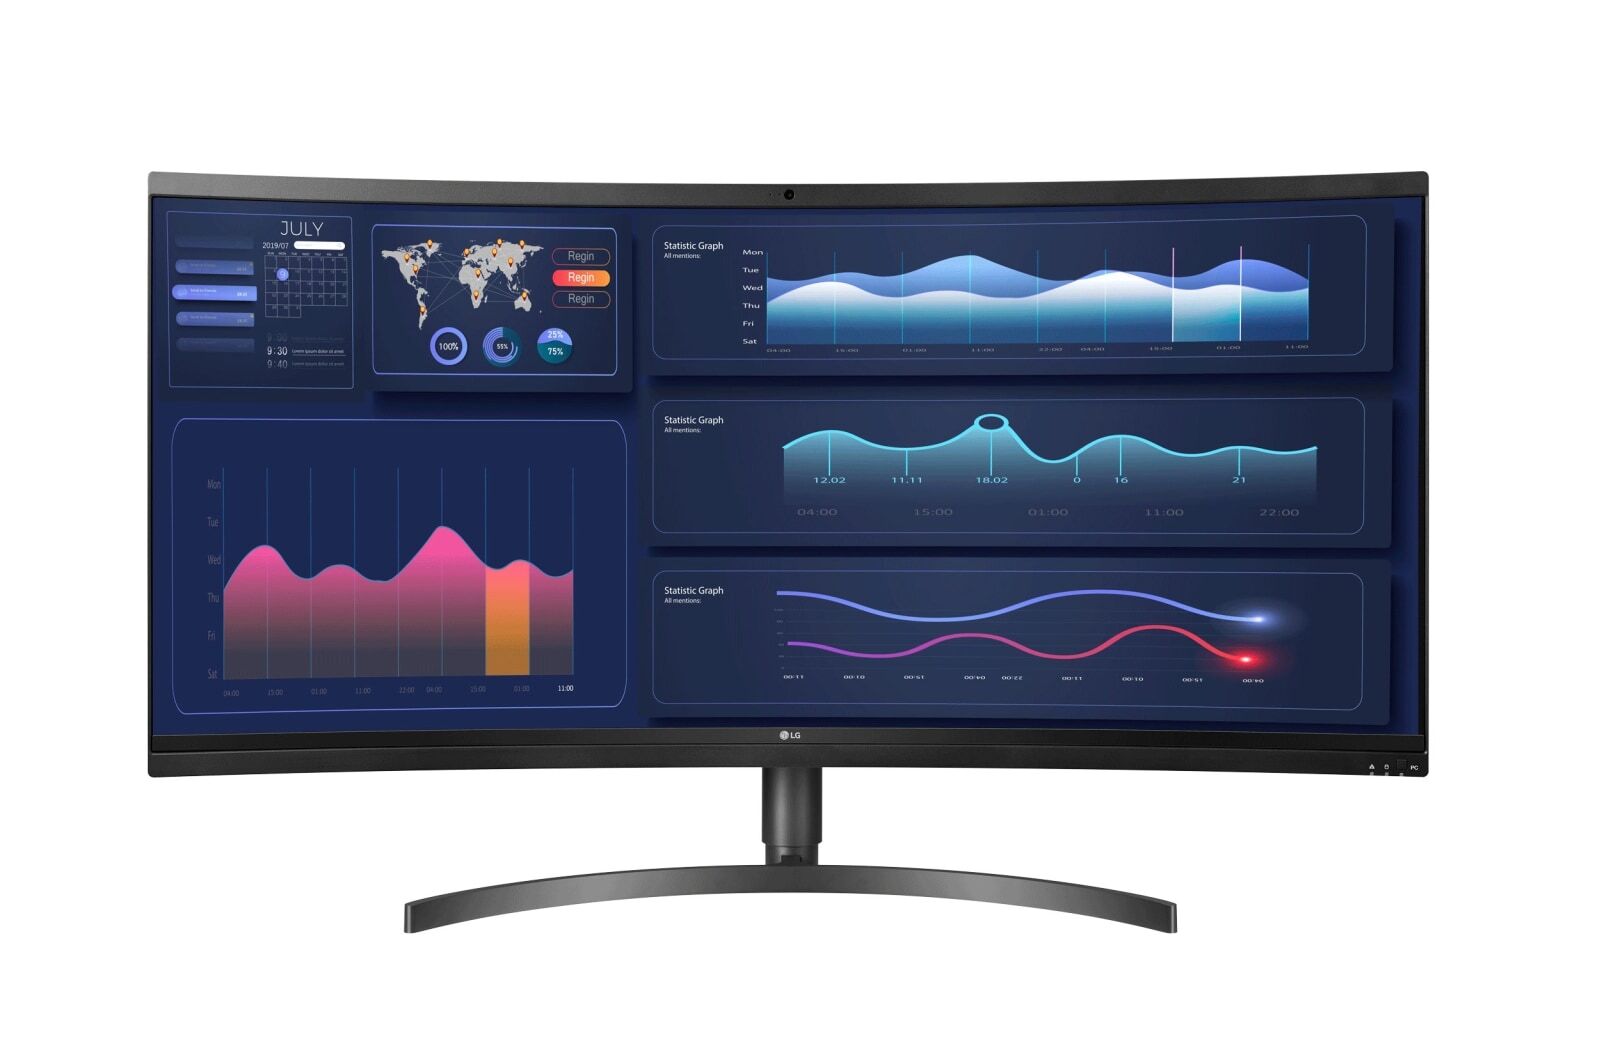 CommericalDisplayWorks.com LG 38CK950N-1C LG 38 inch class Curved UltraWide Thin Client Monitor